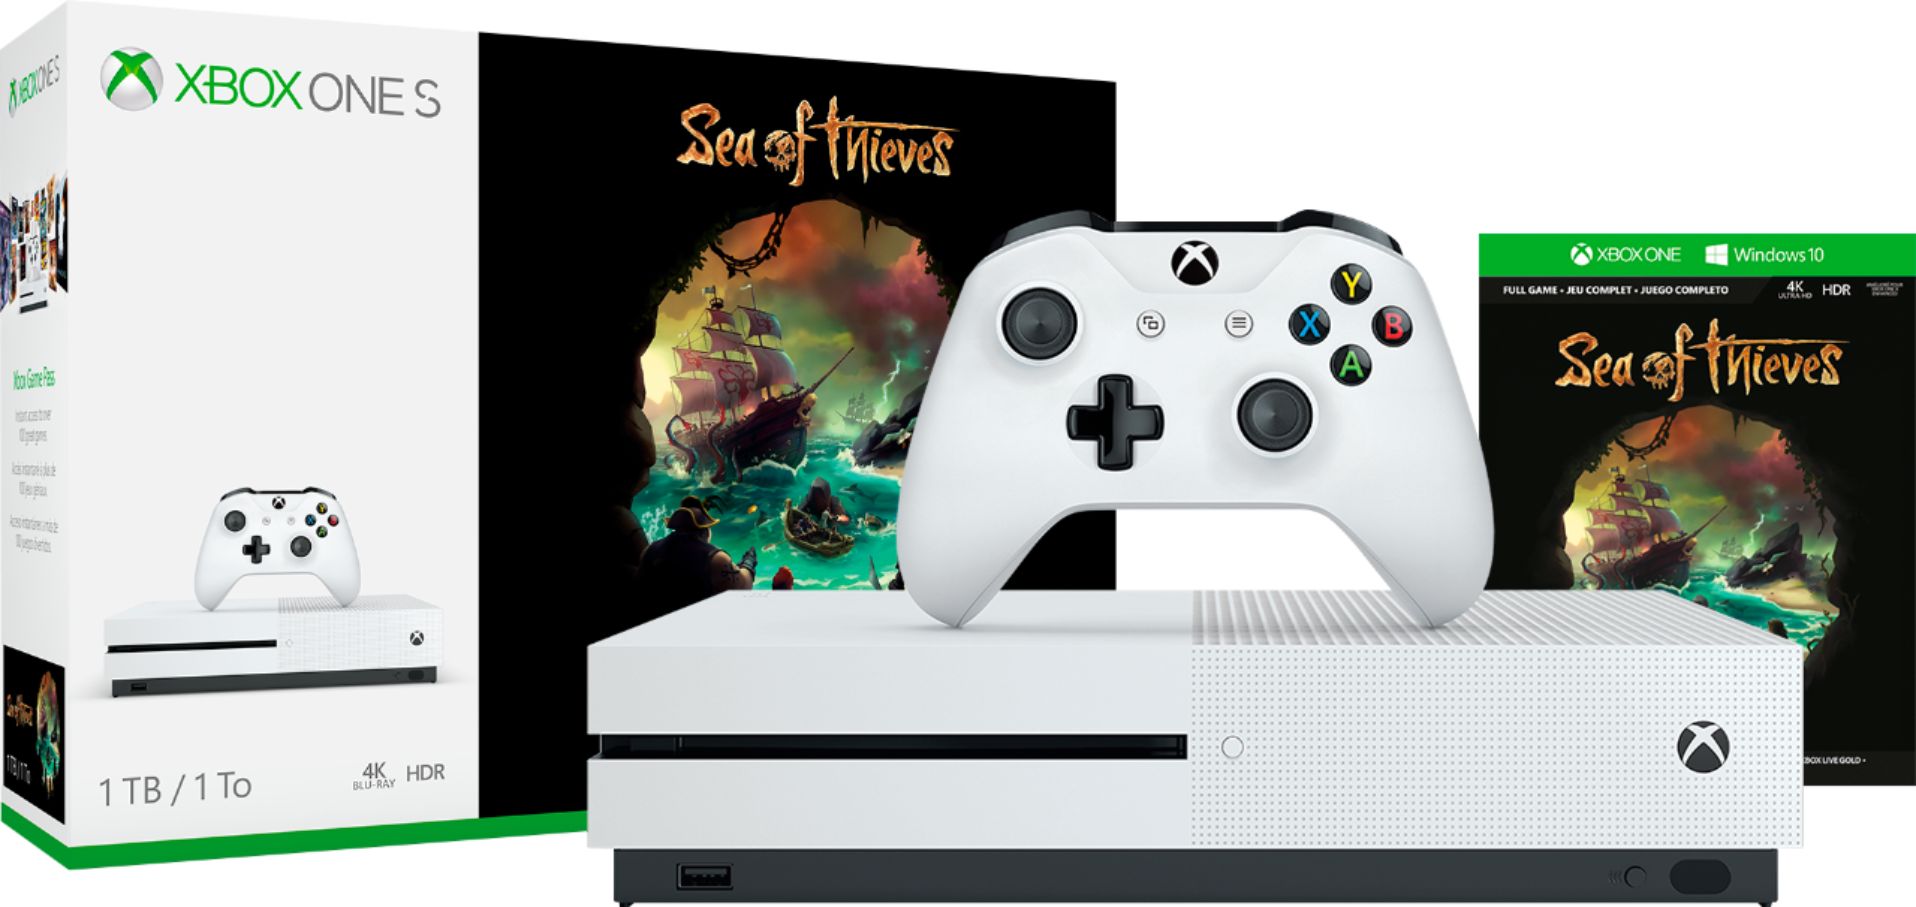 Boodschapper Schelden Claire Microsoft Xbox One S 1TB Sea of Thieves Bundle with 4K Ultra HD Blu-ray  White 234-00324 - Best Buy